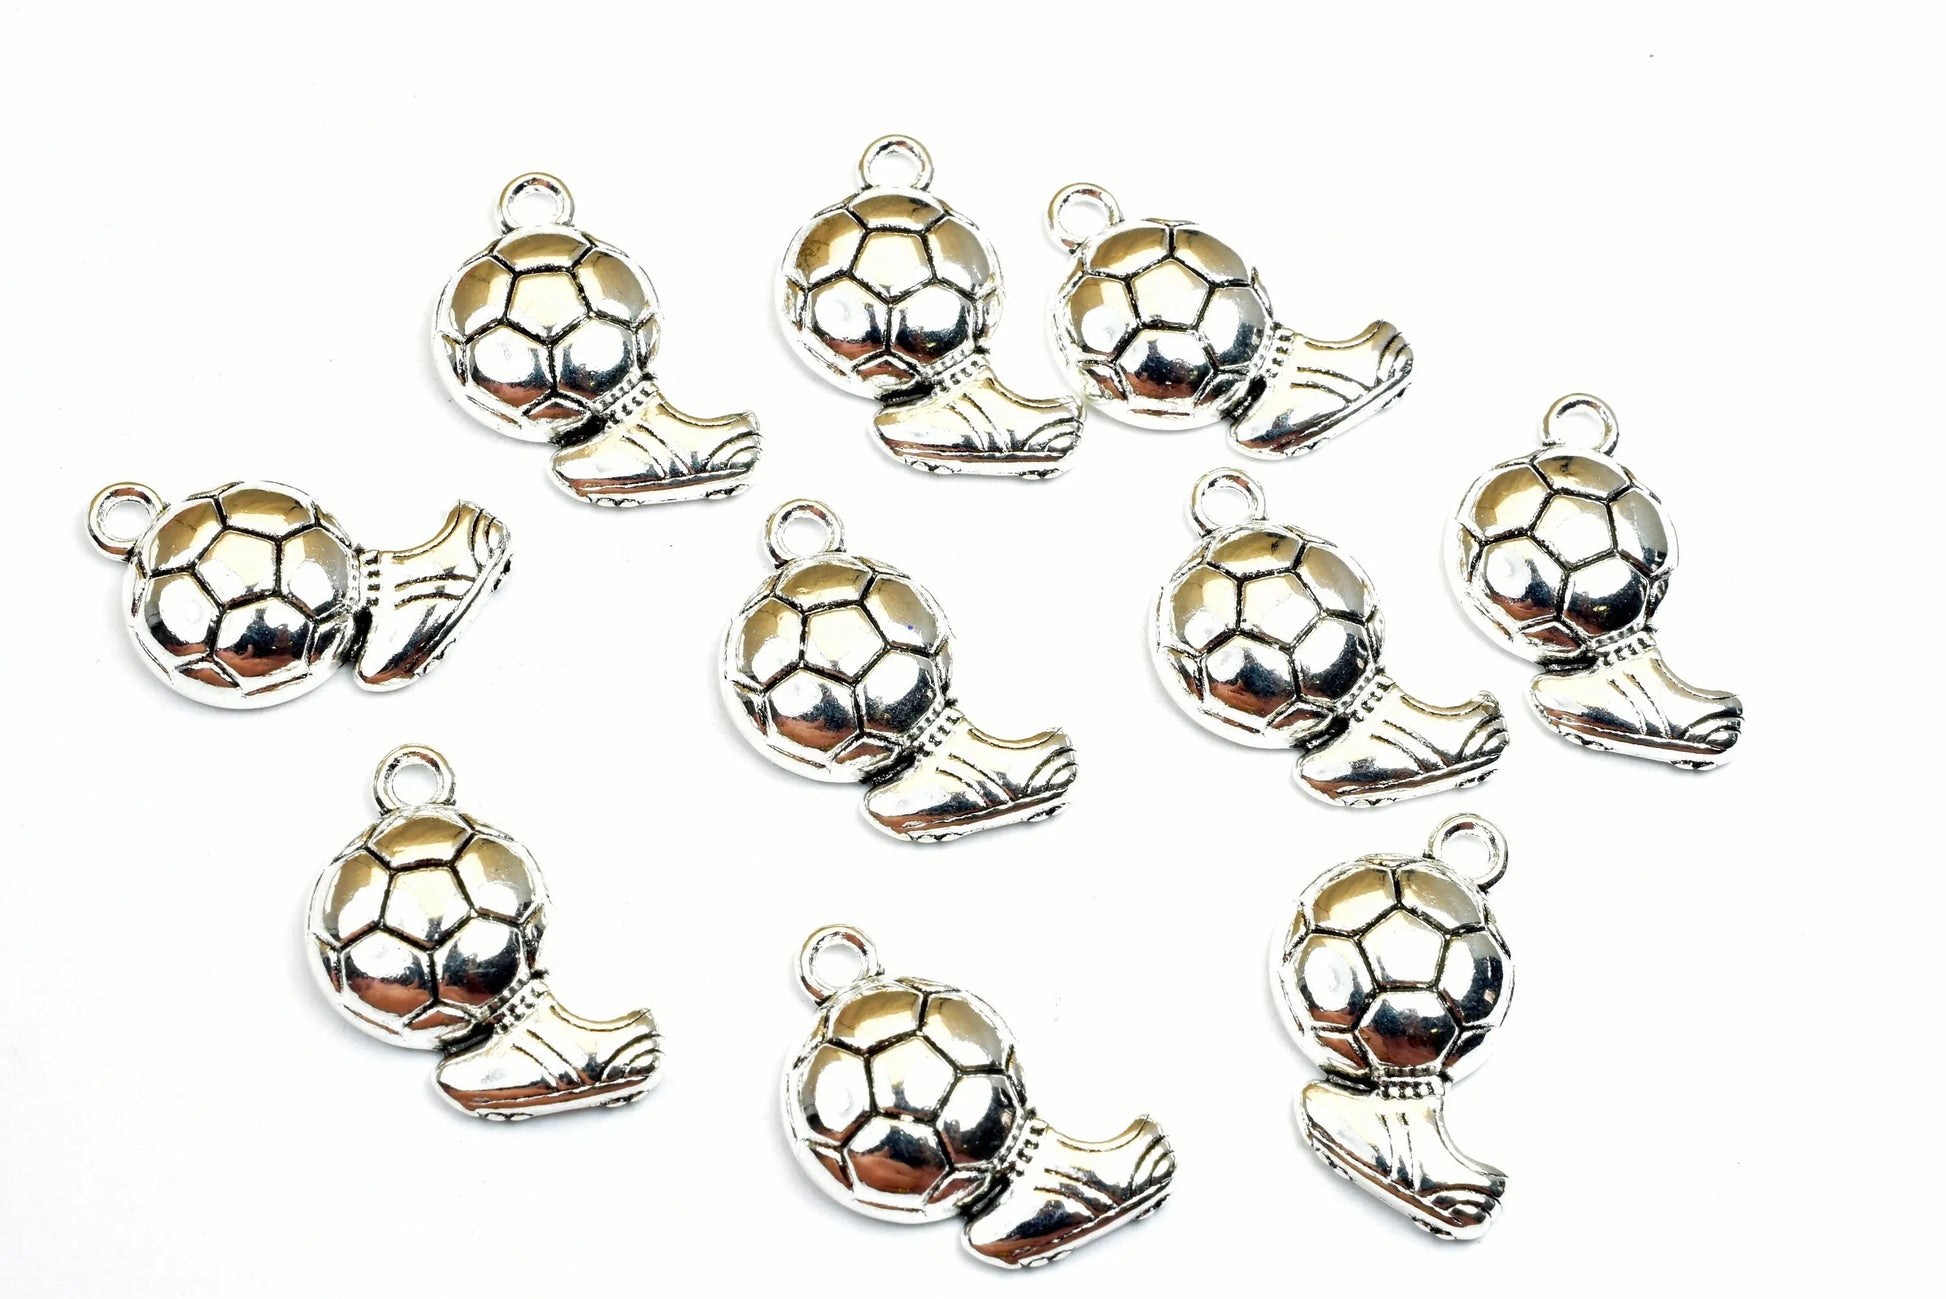 Soccer Ball Sport Charms With Shoe Size 20x12mm Silver Color Charm Pendant Finding For Jewelry Making 10PCs Per Pack - BeadsFindingDepot